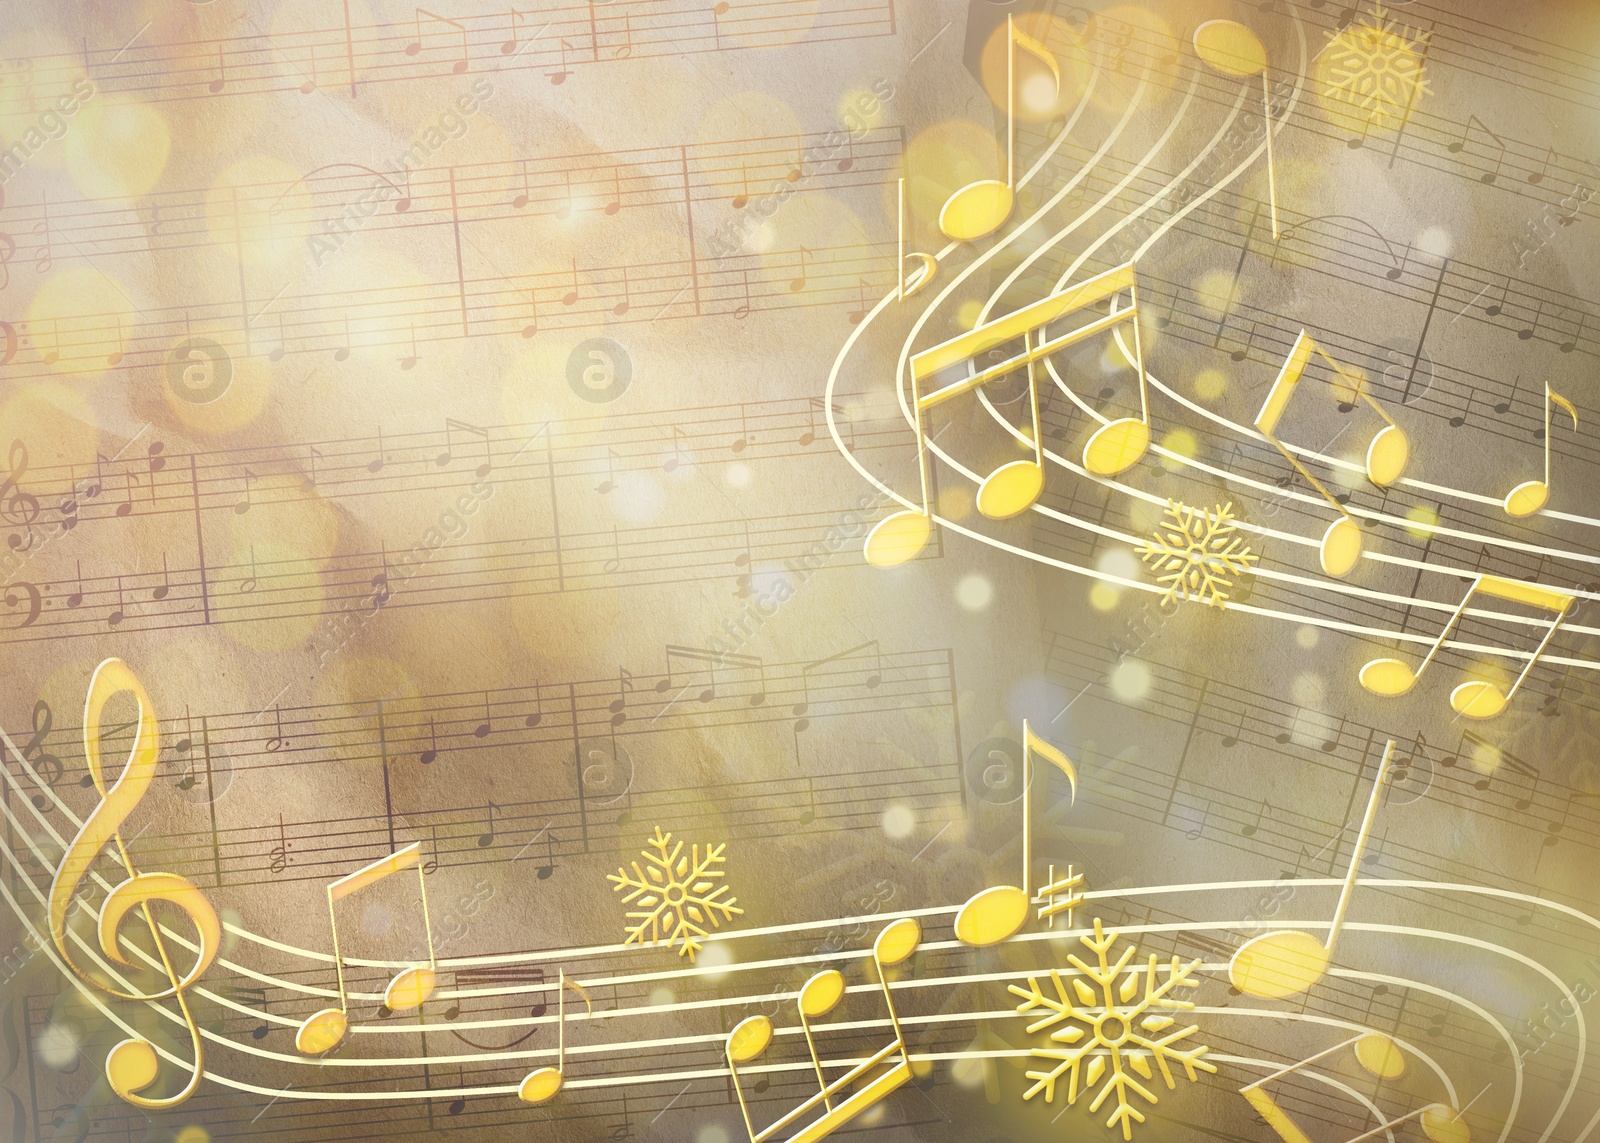 Image of Treble clef, music notes, snowflakes and sheet with musical symbols. Bokeh effect